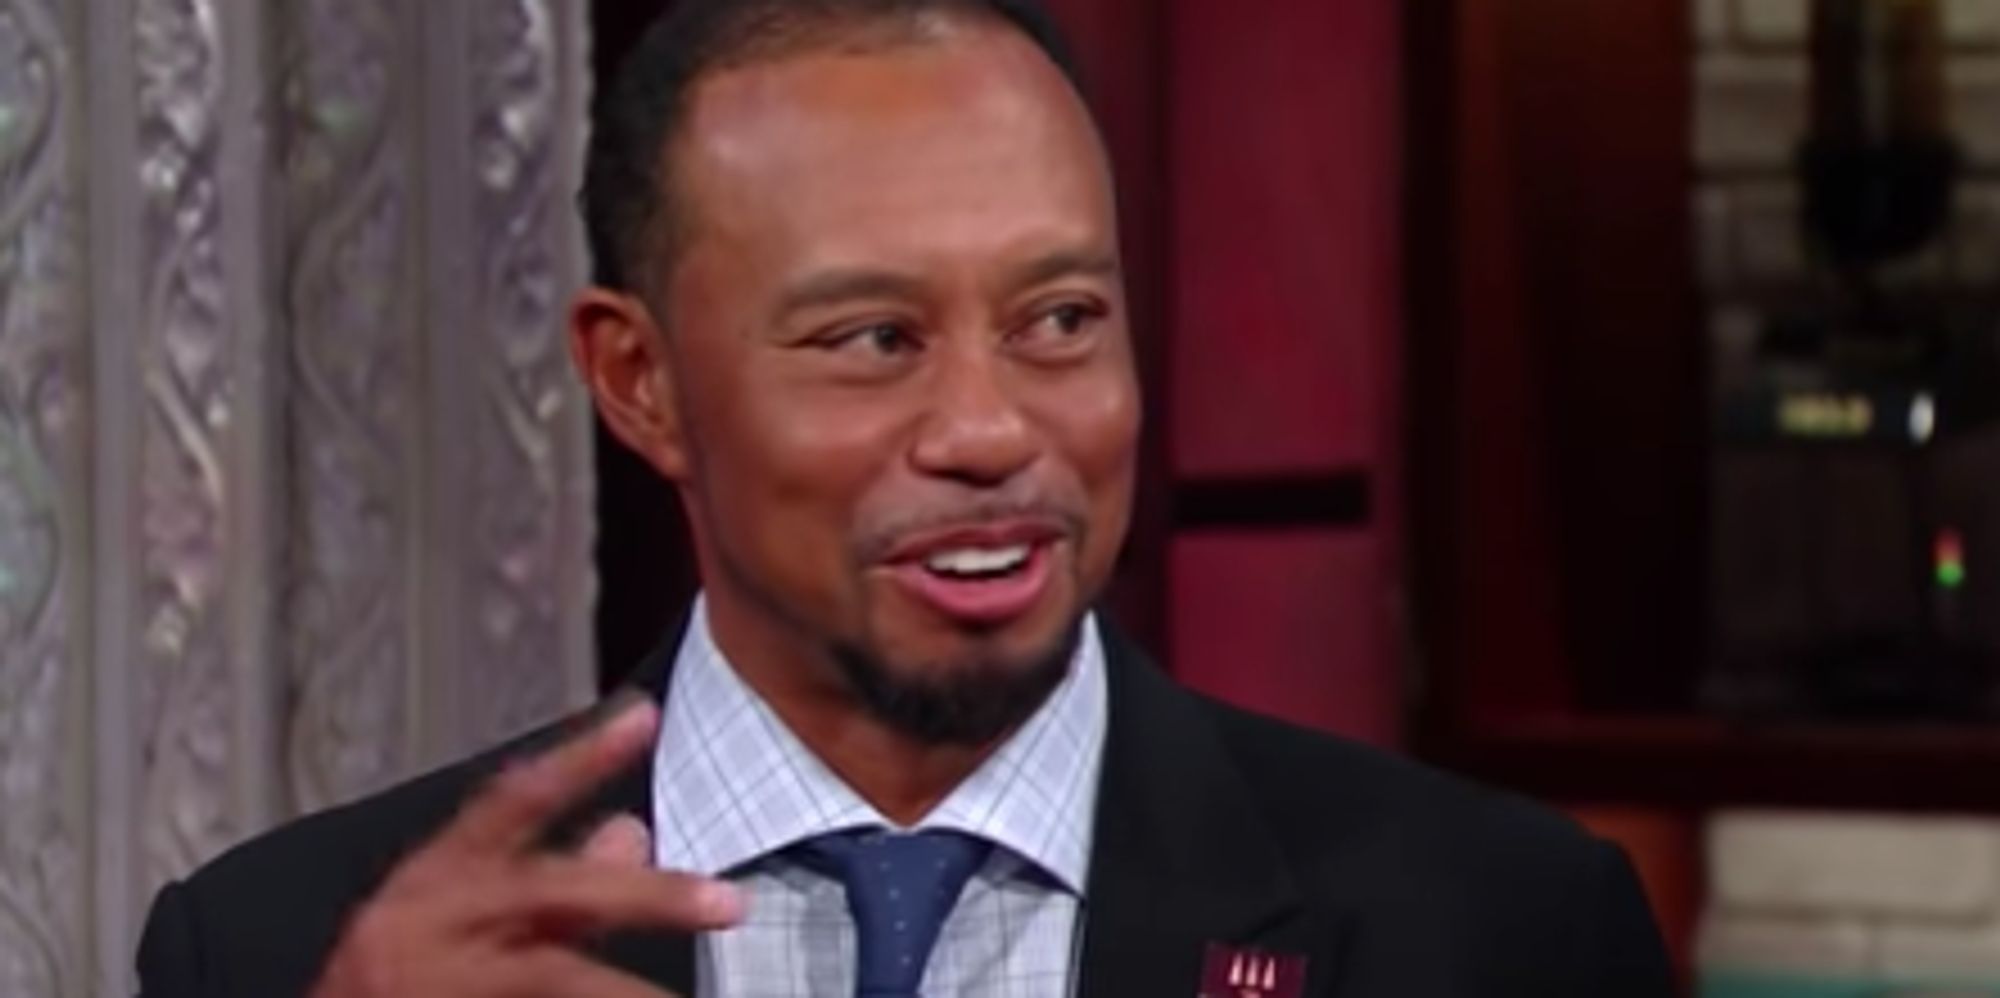 Tiger Woods Makes Sly Dig At Donald Trump During Presidential Golf Chat - Huffington Post